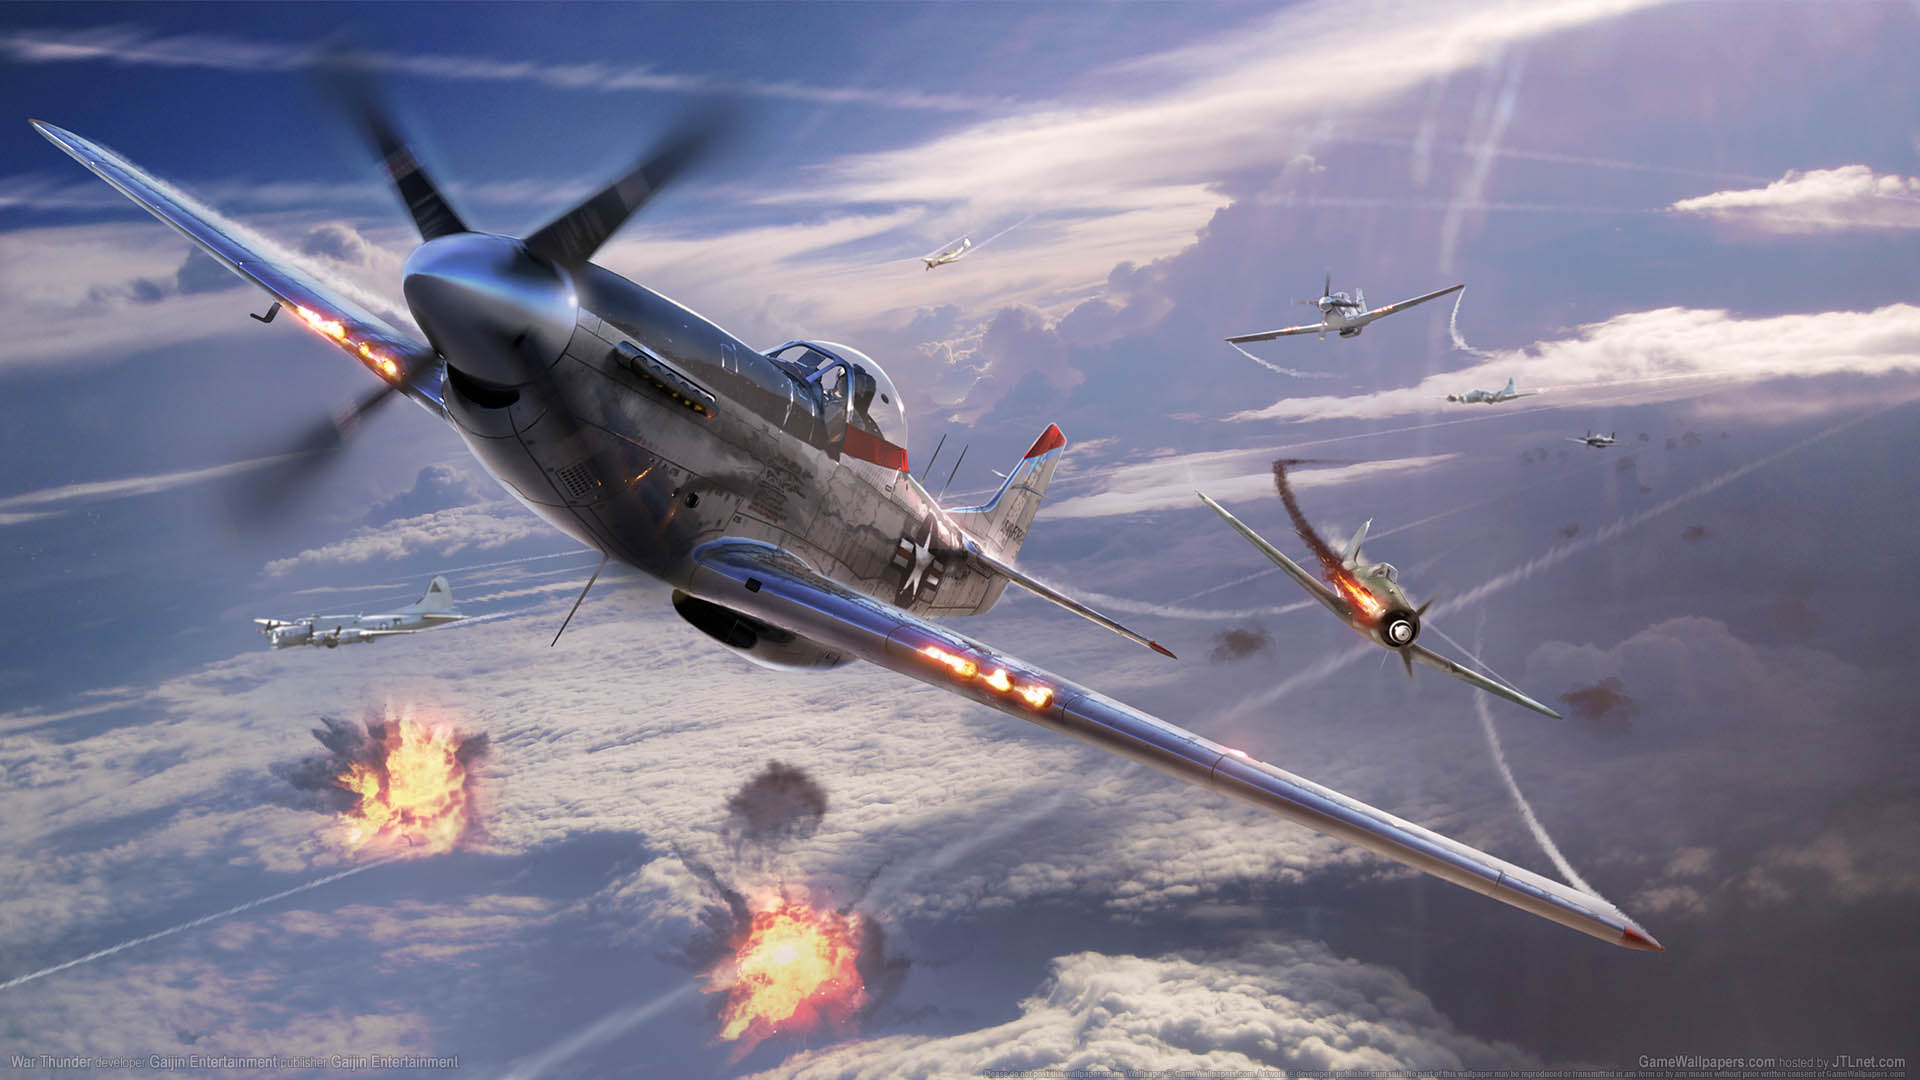 War Thunder fans can't stop leaking classified military documents